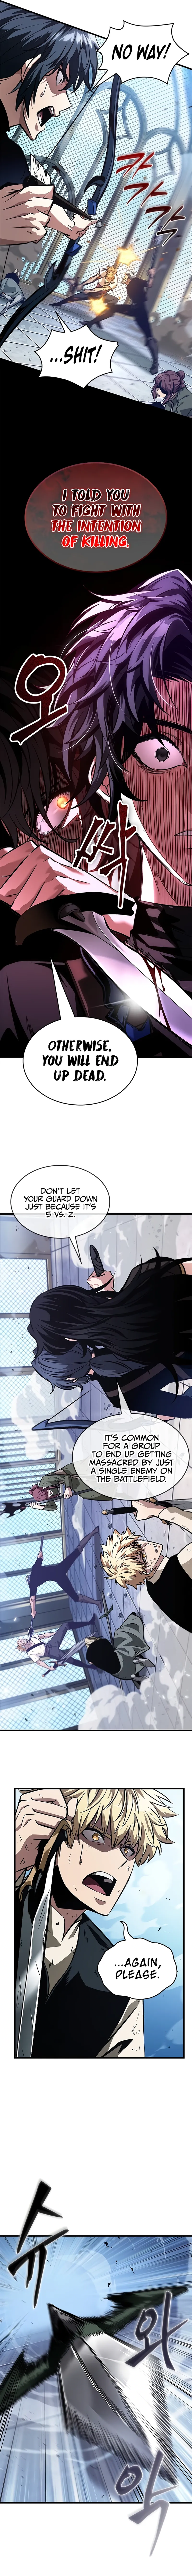 Pick Me Up Chapter 87 page 3